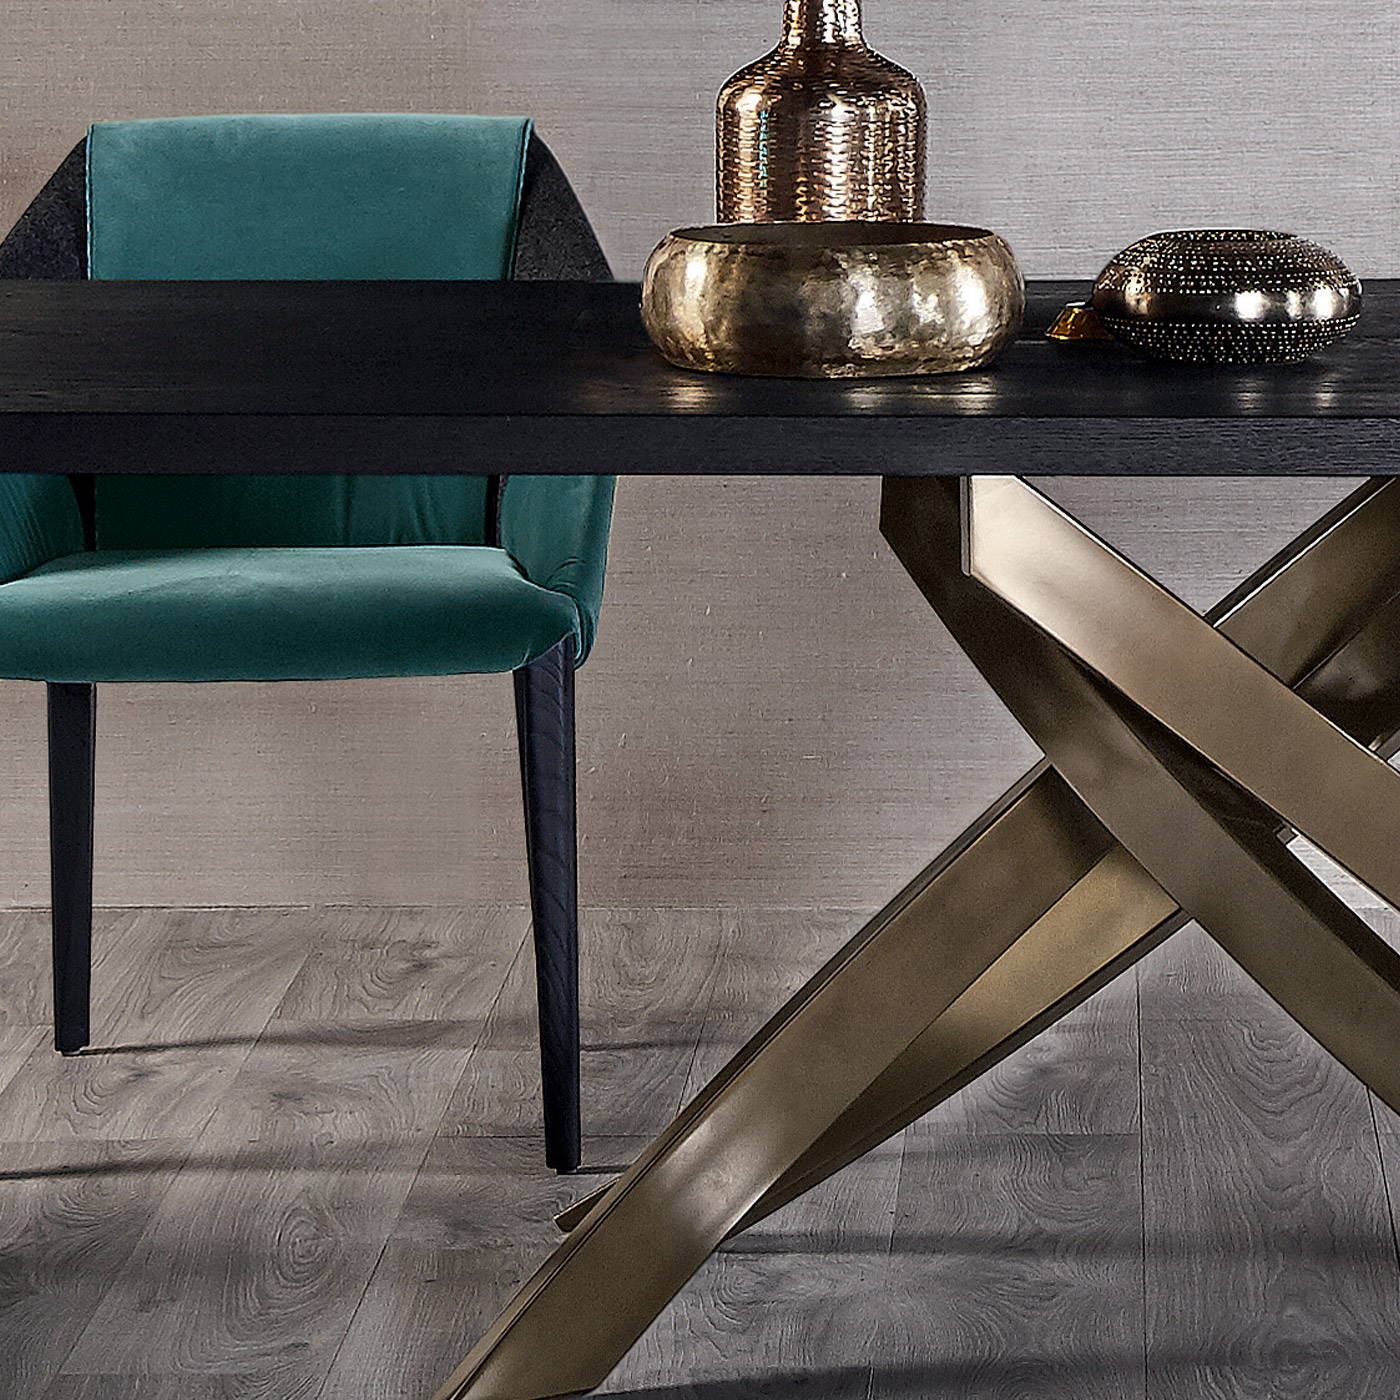 Stylish Italian Made & Designed Furniture. Introducing Bontempi Casa At BF Home In Norwich